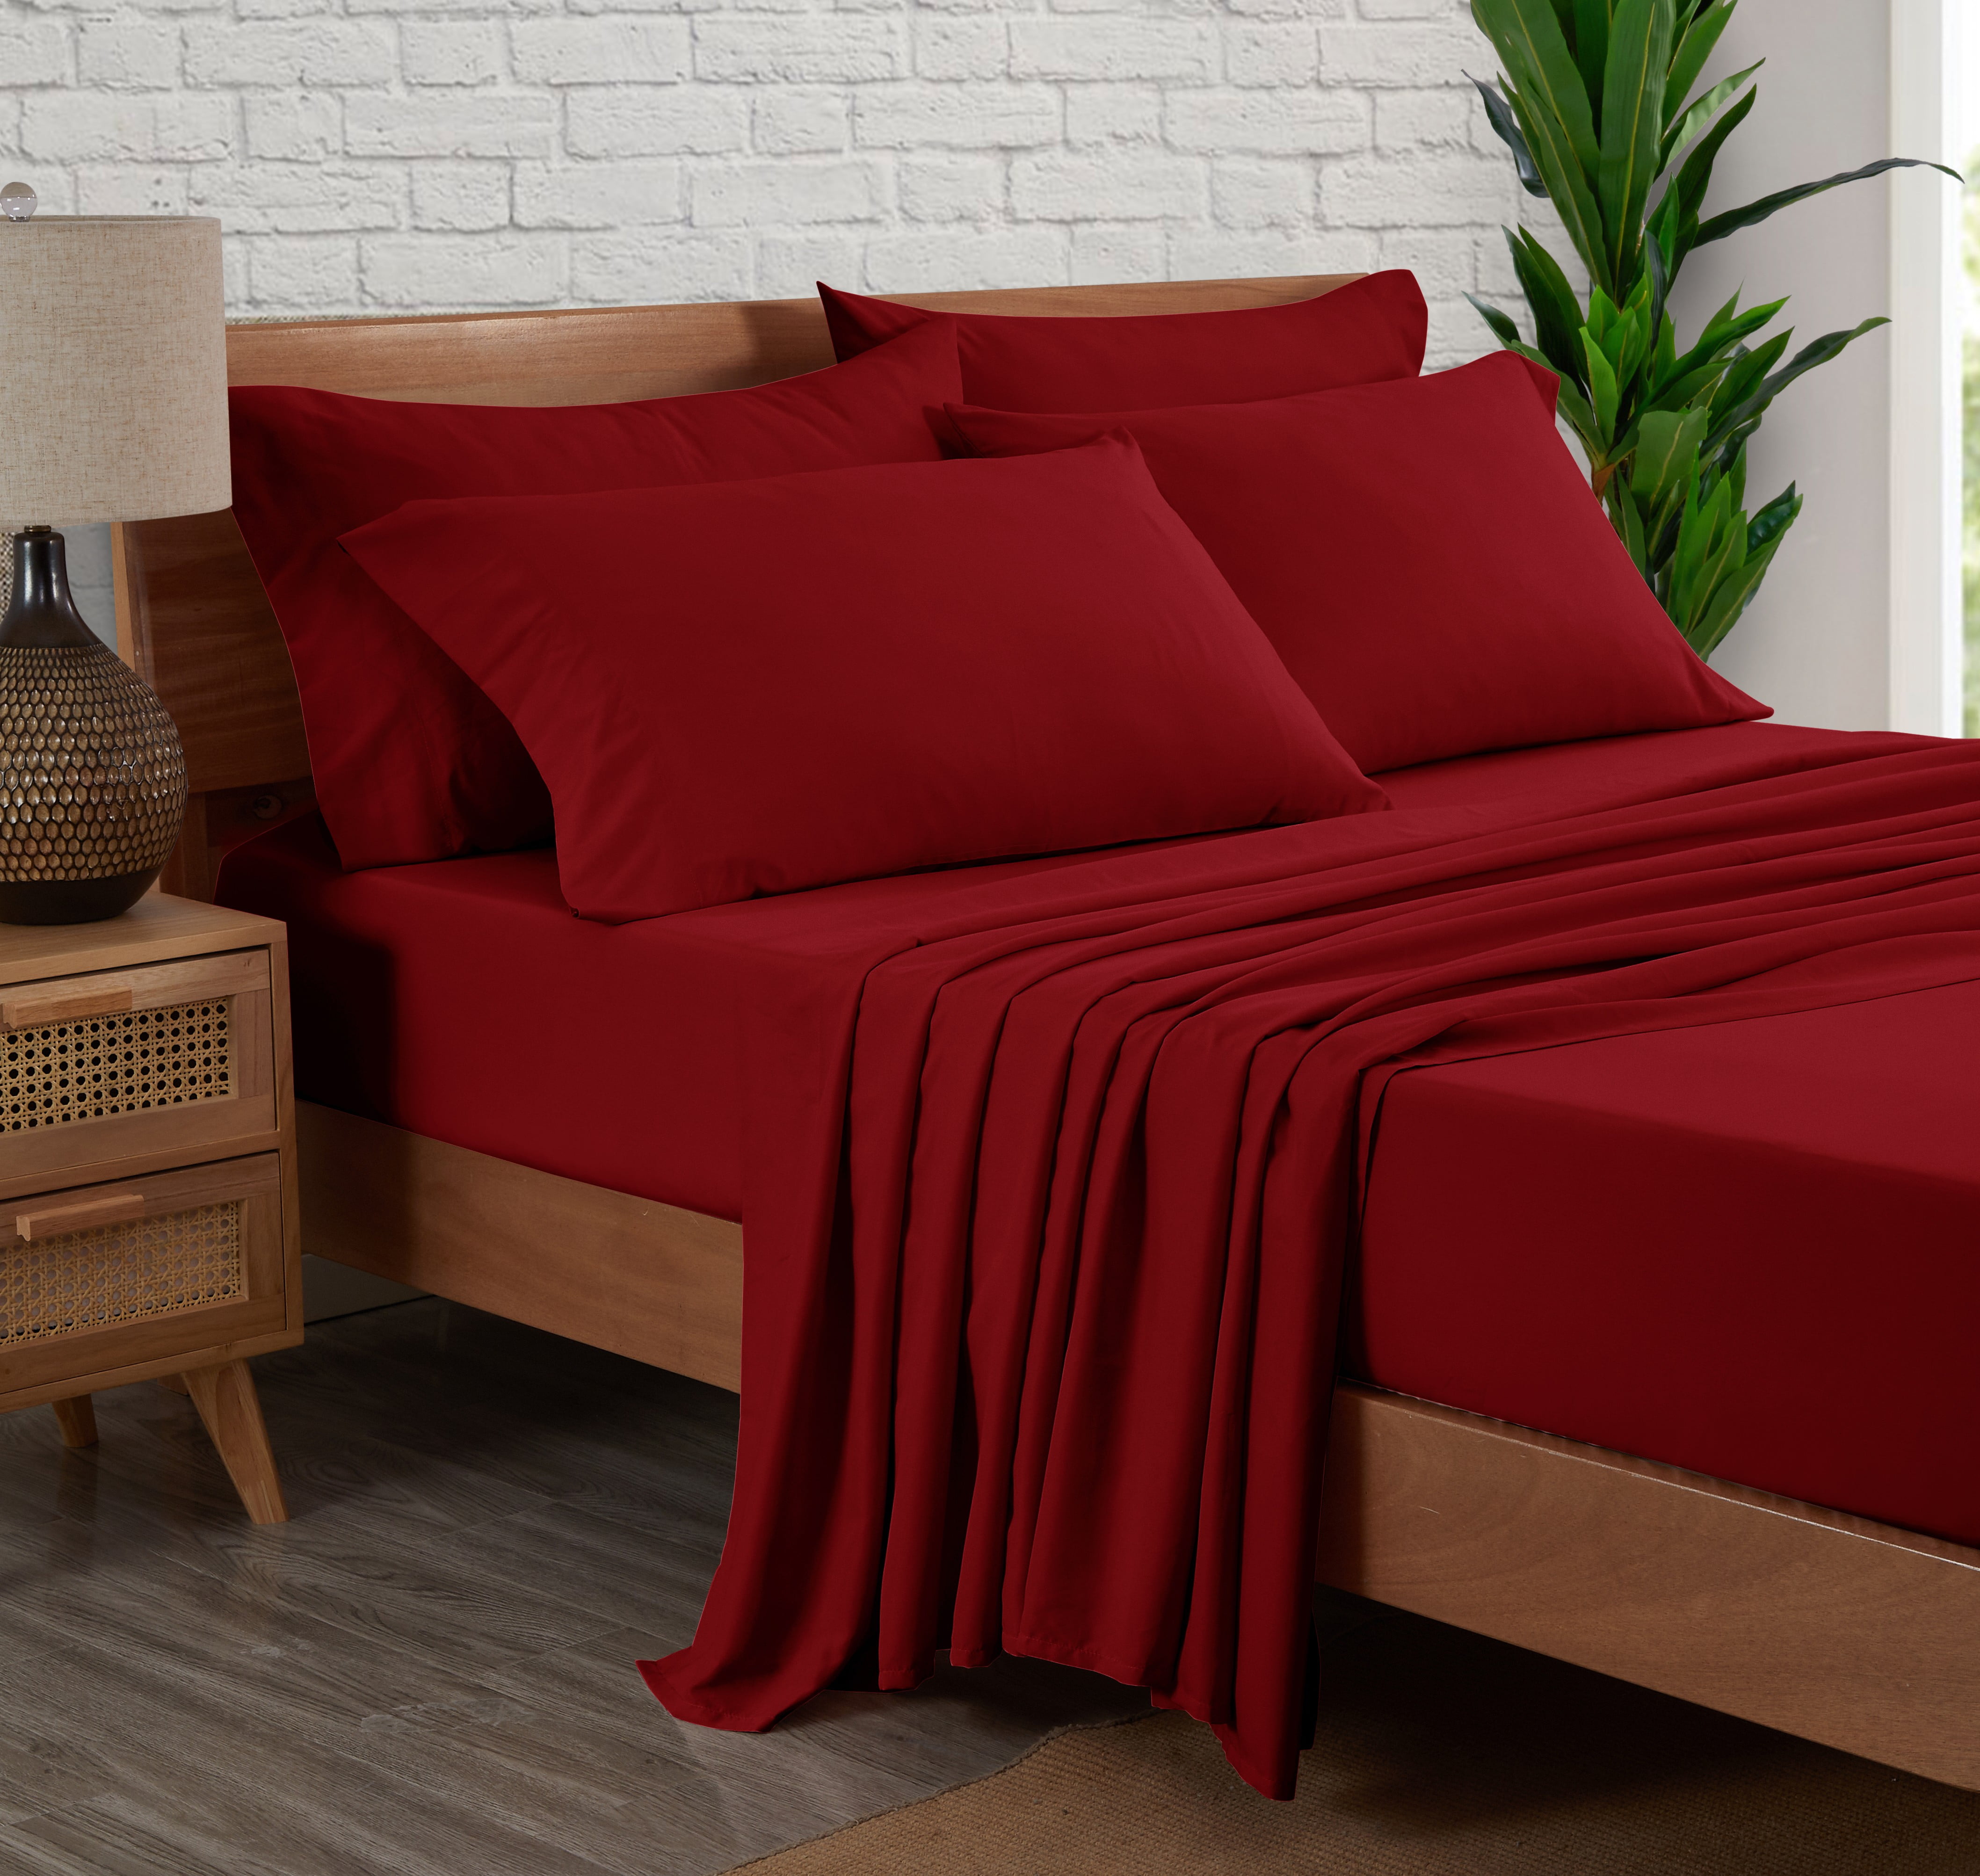 XingShow Red Waterproof Fitted Sheet Queen Deep Pocket Brushed Microfiber  Solid Mattress Protector Bed Cover Queen-60*80*13.7